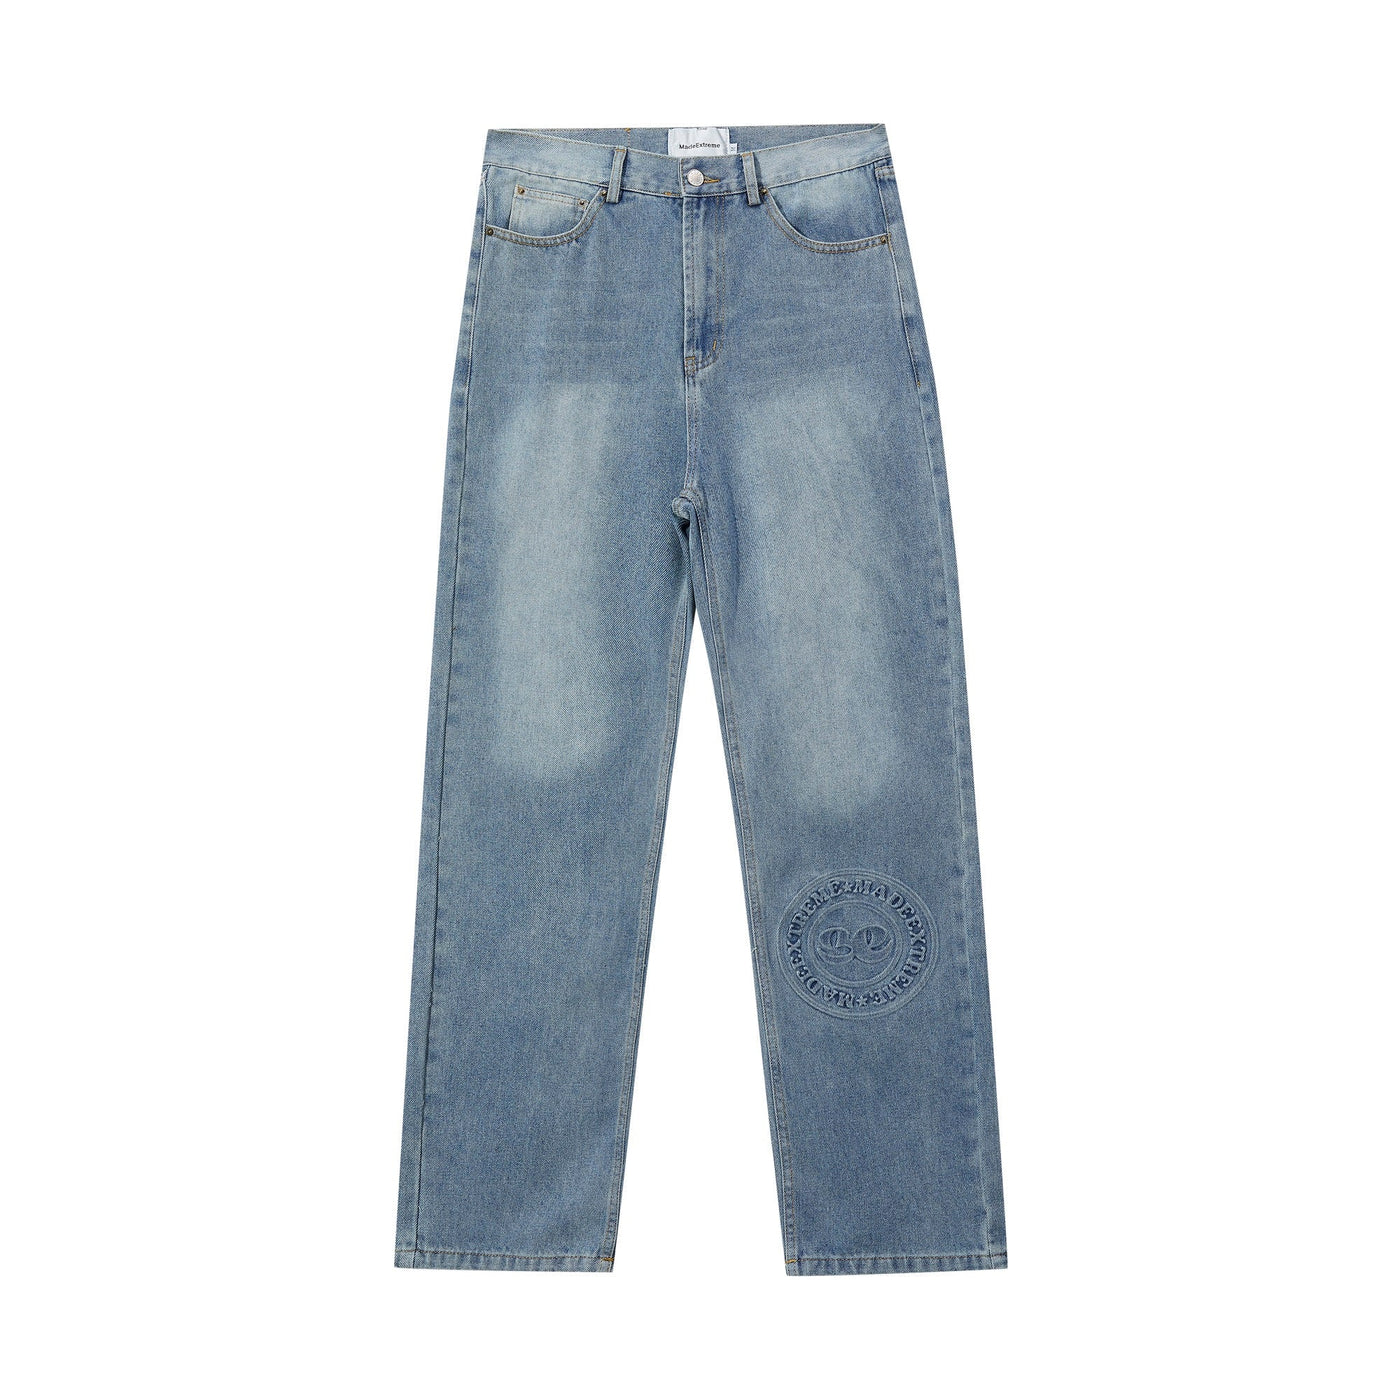 Made Extreme Washed Logo Patch Loose Straight Jeans Korean Street Fashion Jeans By Made Extreme Shop Online at OH Vault